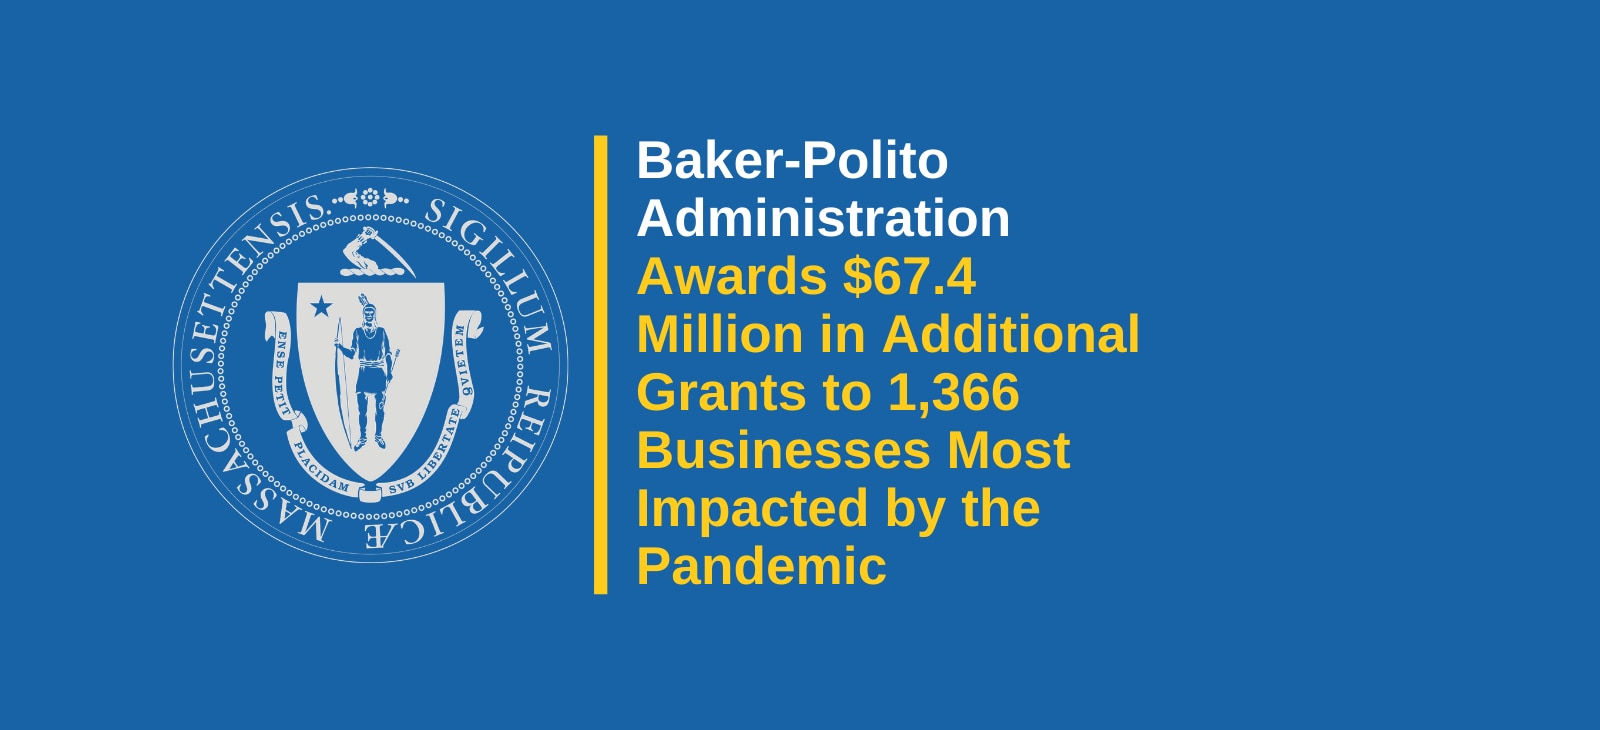 Baker-Polito Administration Awards $67.4 Million in Additional Grants to 1,366 Businesses Most Impacted by the Pandemic